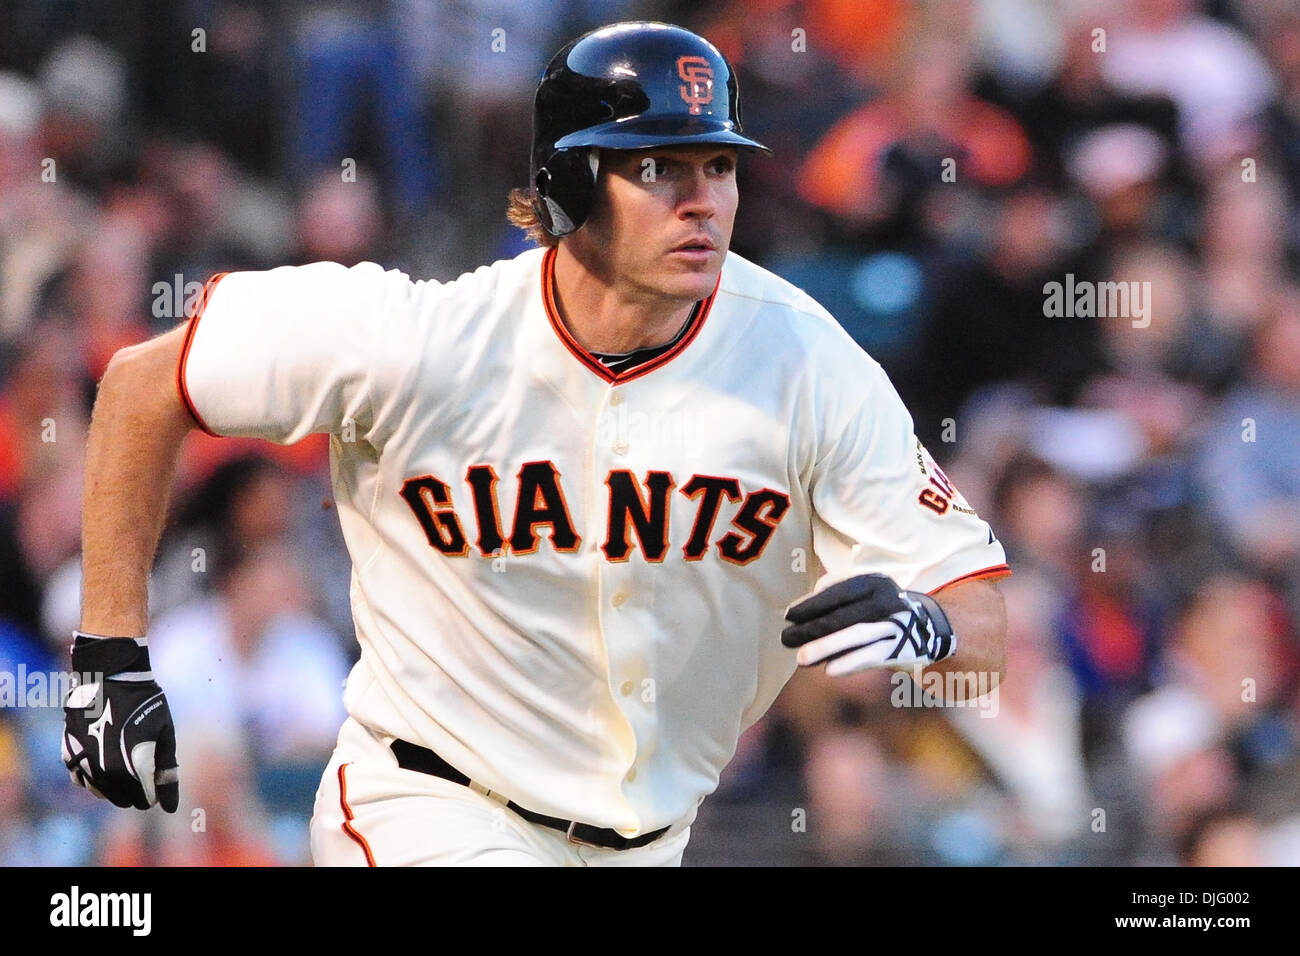 San Francisco, CA: San Francisco Giants pitcher Barry Zito (75) runs to first base. The Los Angeles Dodgers won the game 4-2. (Credit Image: © Charles Herskowitz/Southcreek Global/ZUMApress.com) Stock Photo